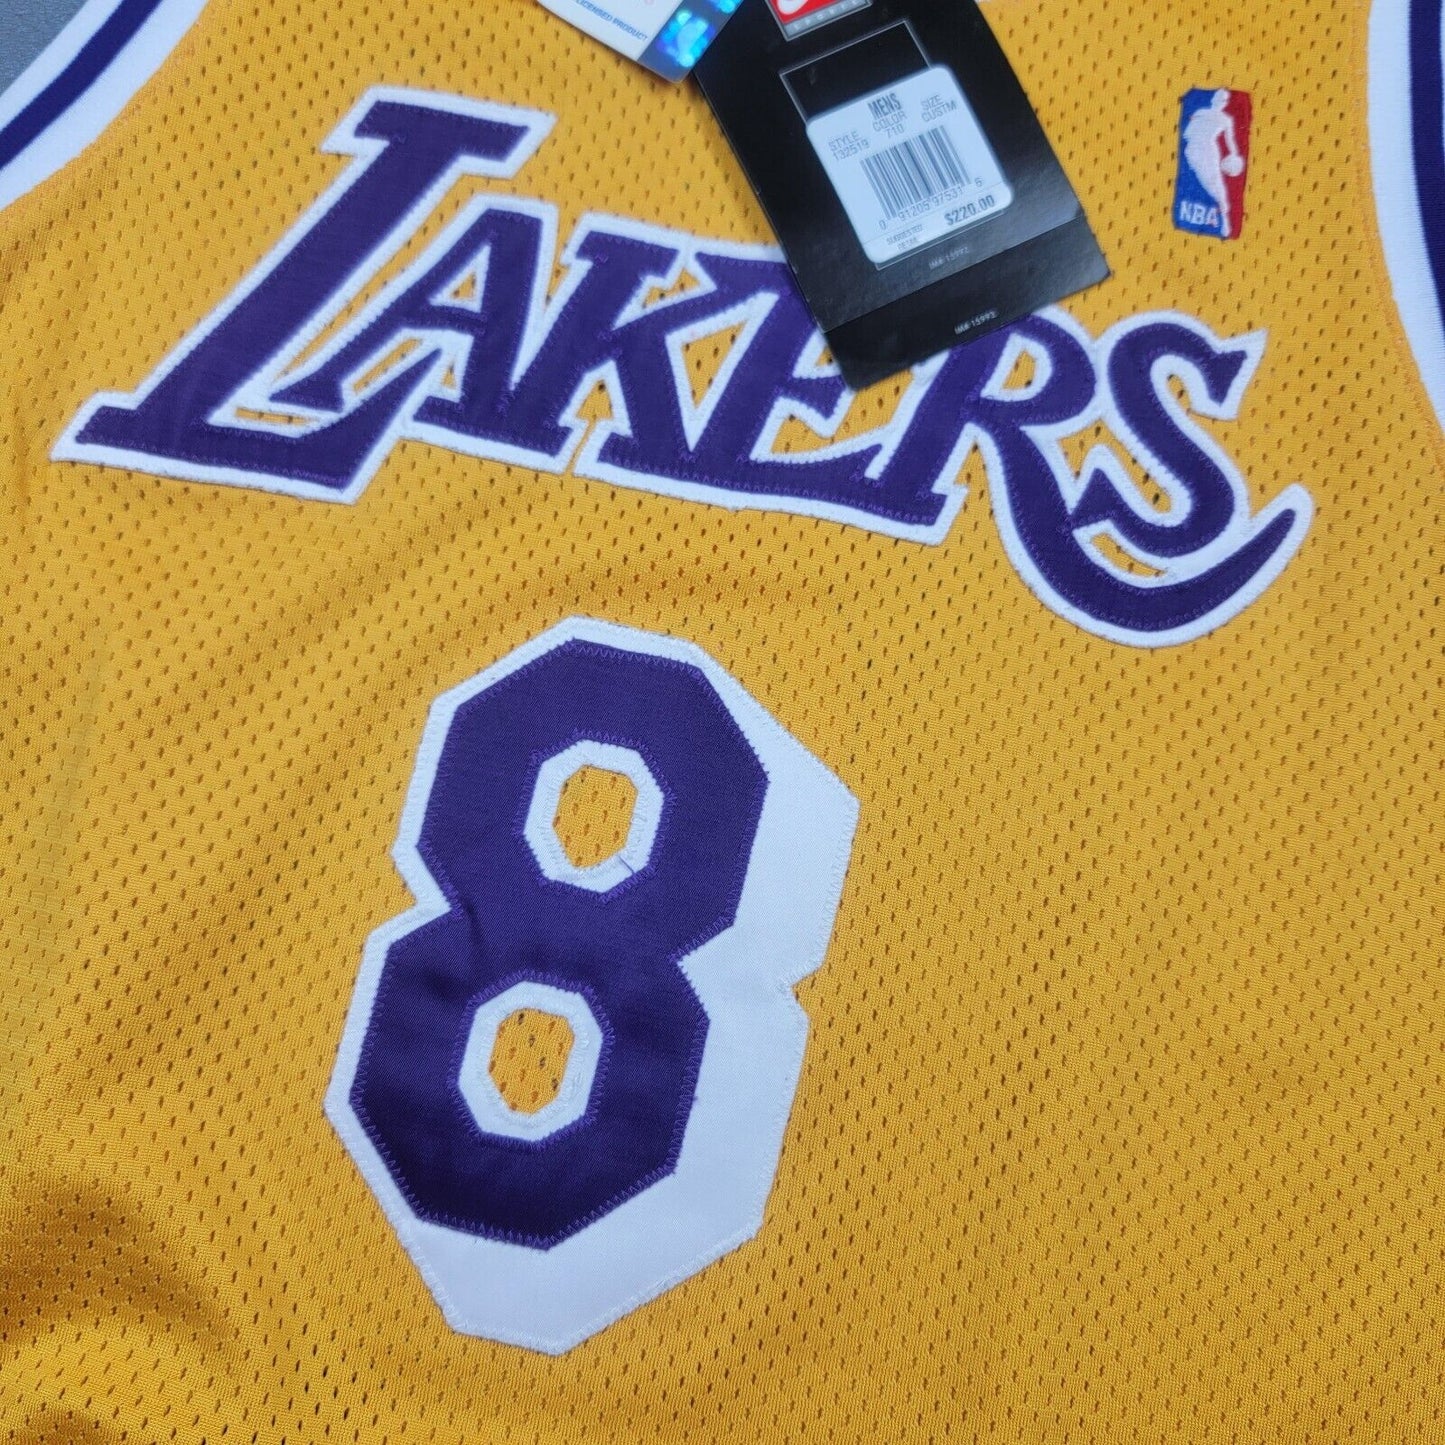 100% Authentic Kobe Bryant Nike 98 99 Los Angeles Lakers Pro Cut Jersey 46+4"